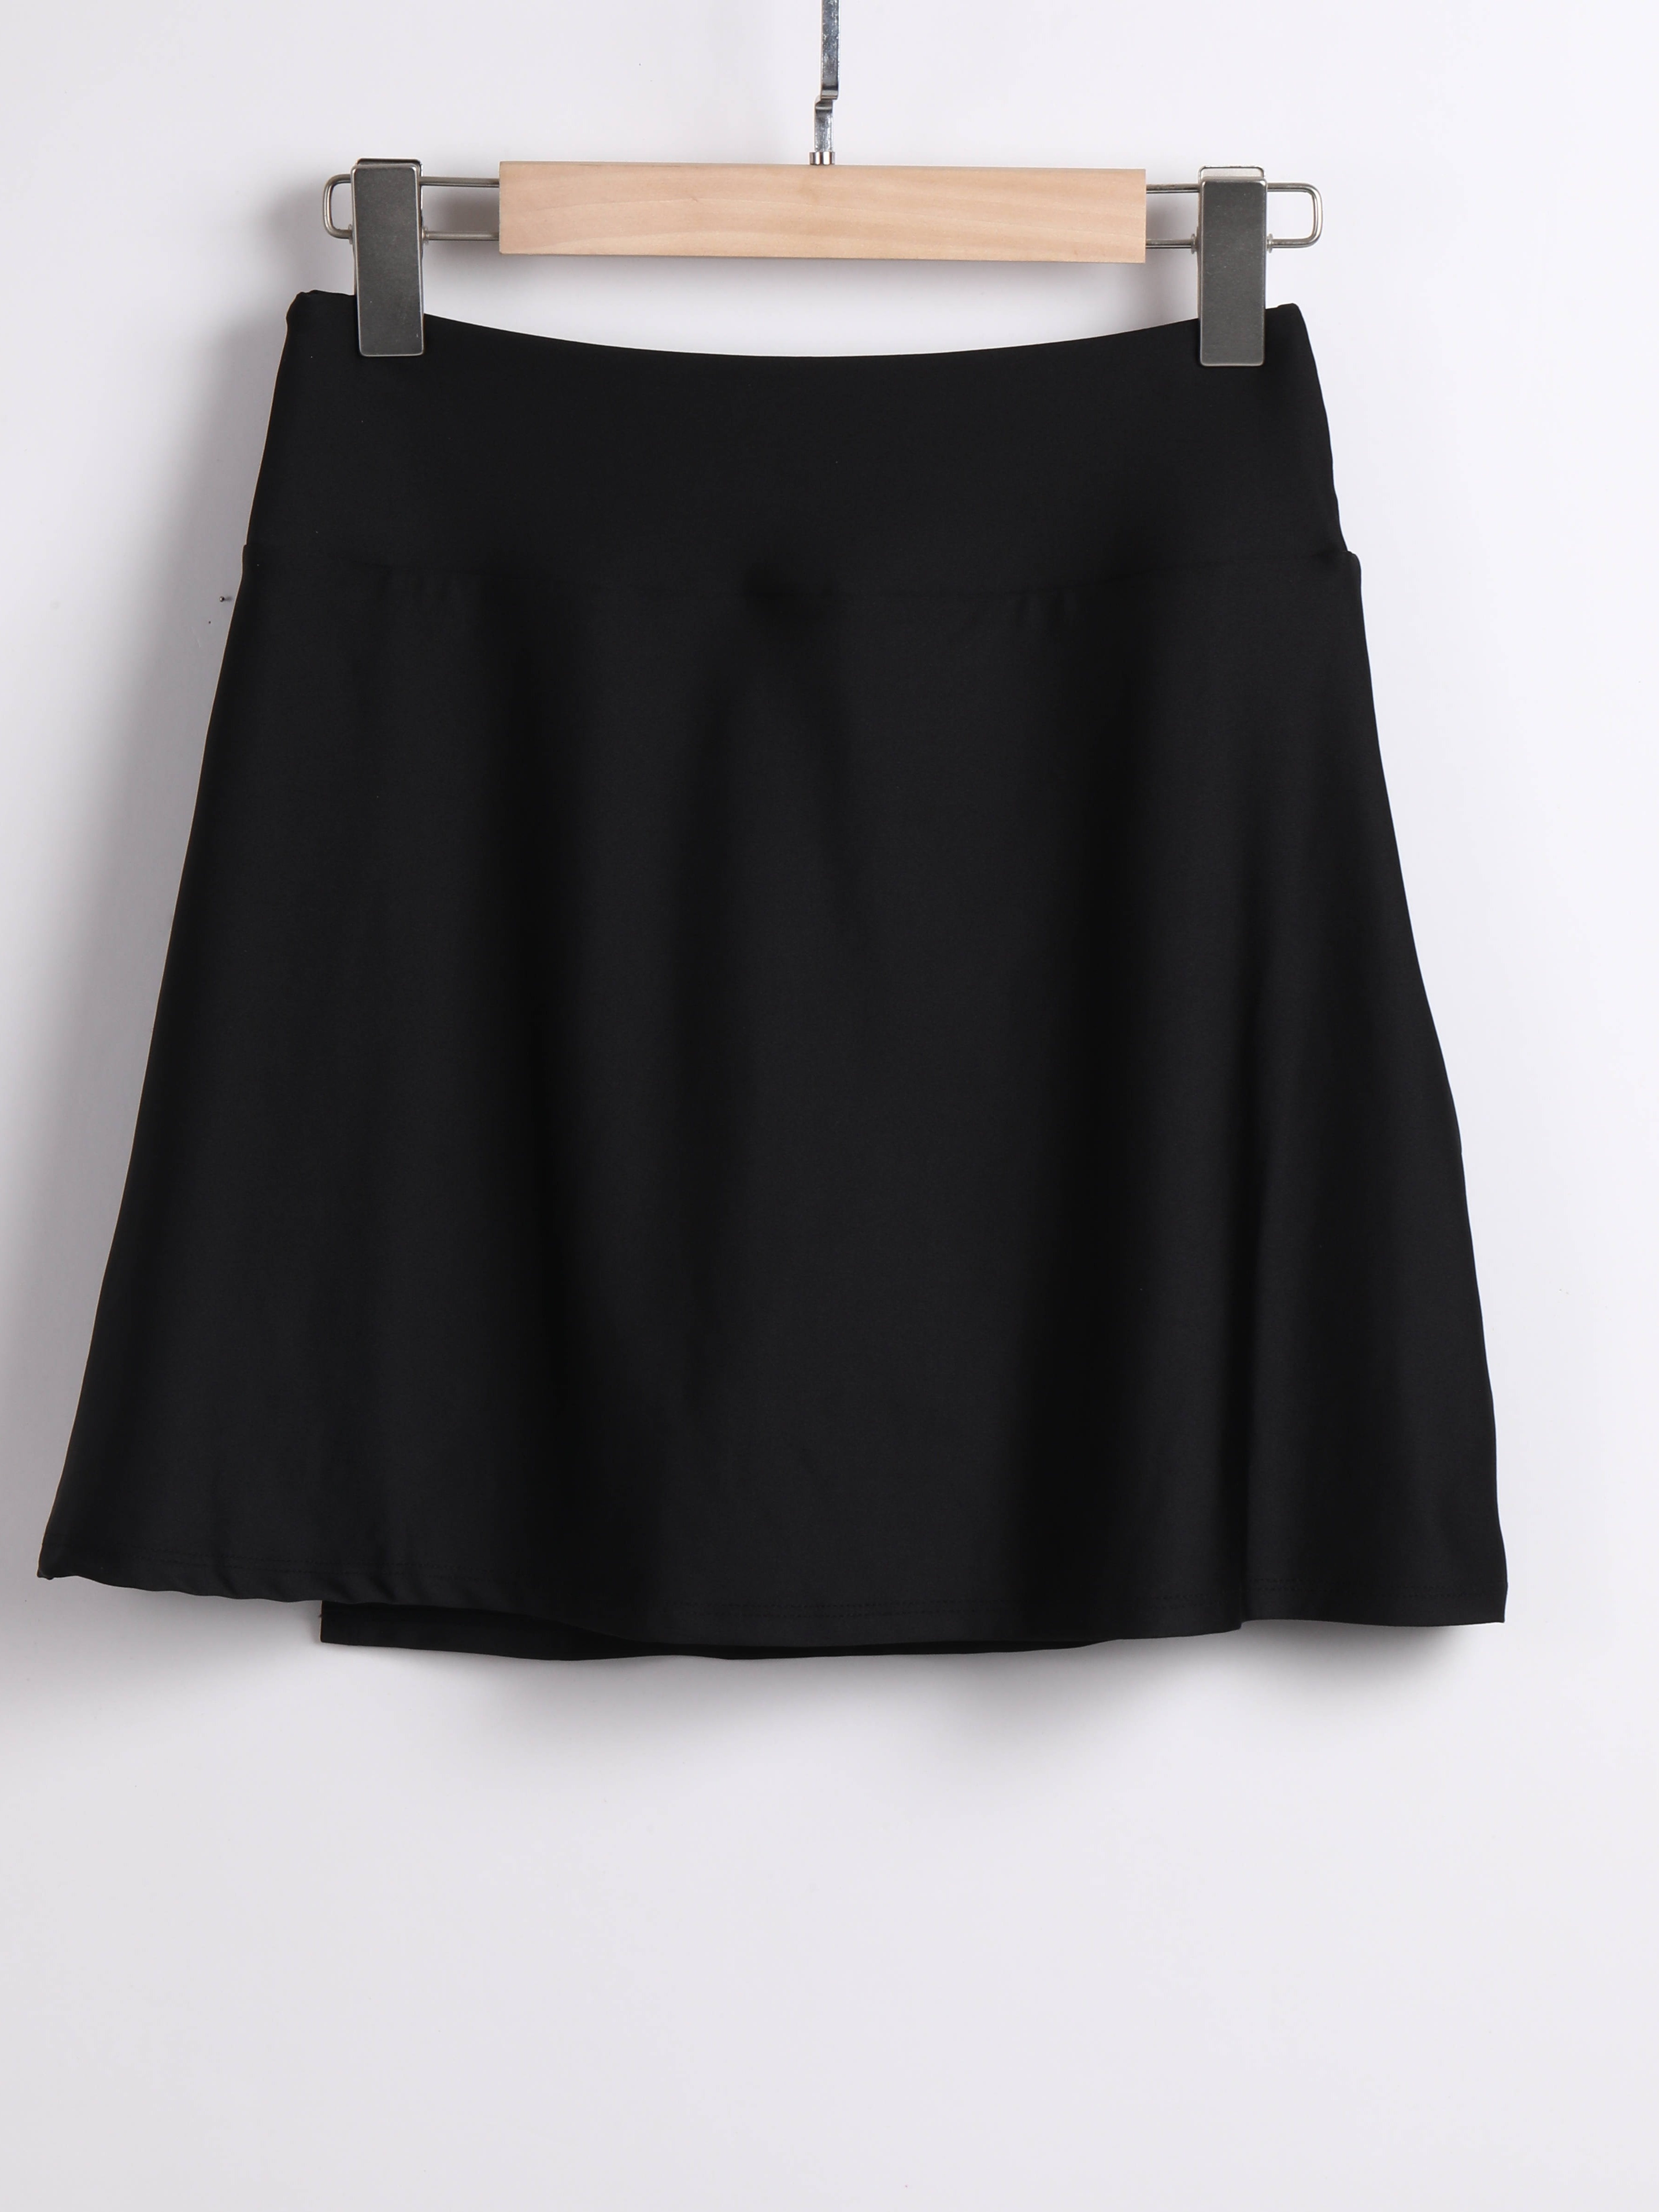 High Waist Nylon Werena Tennis Skirt For Women Perfect For Summer Sports,  Fitness, Yoga, Running, Gym Workouts Style 230404 From Ning07, $14.6